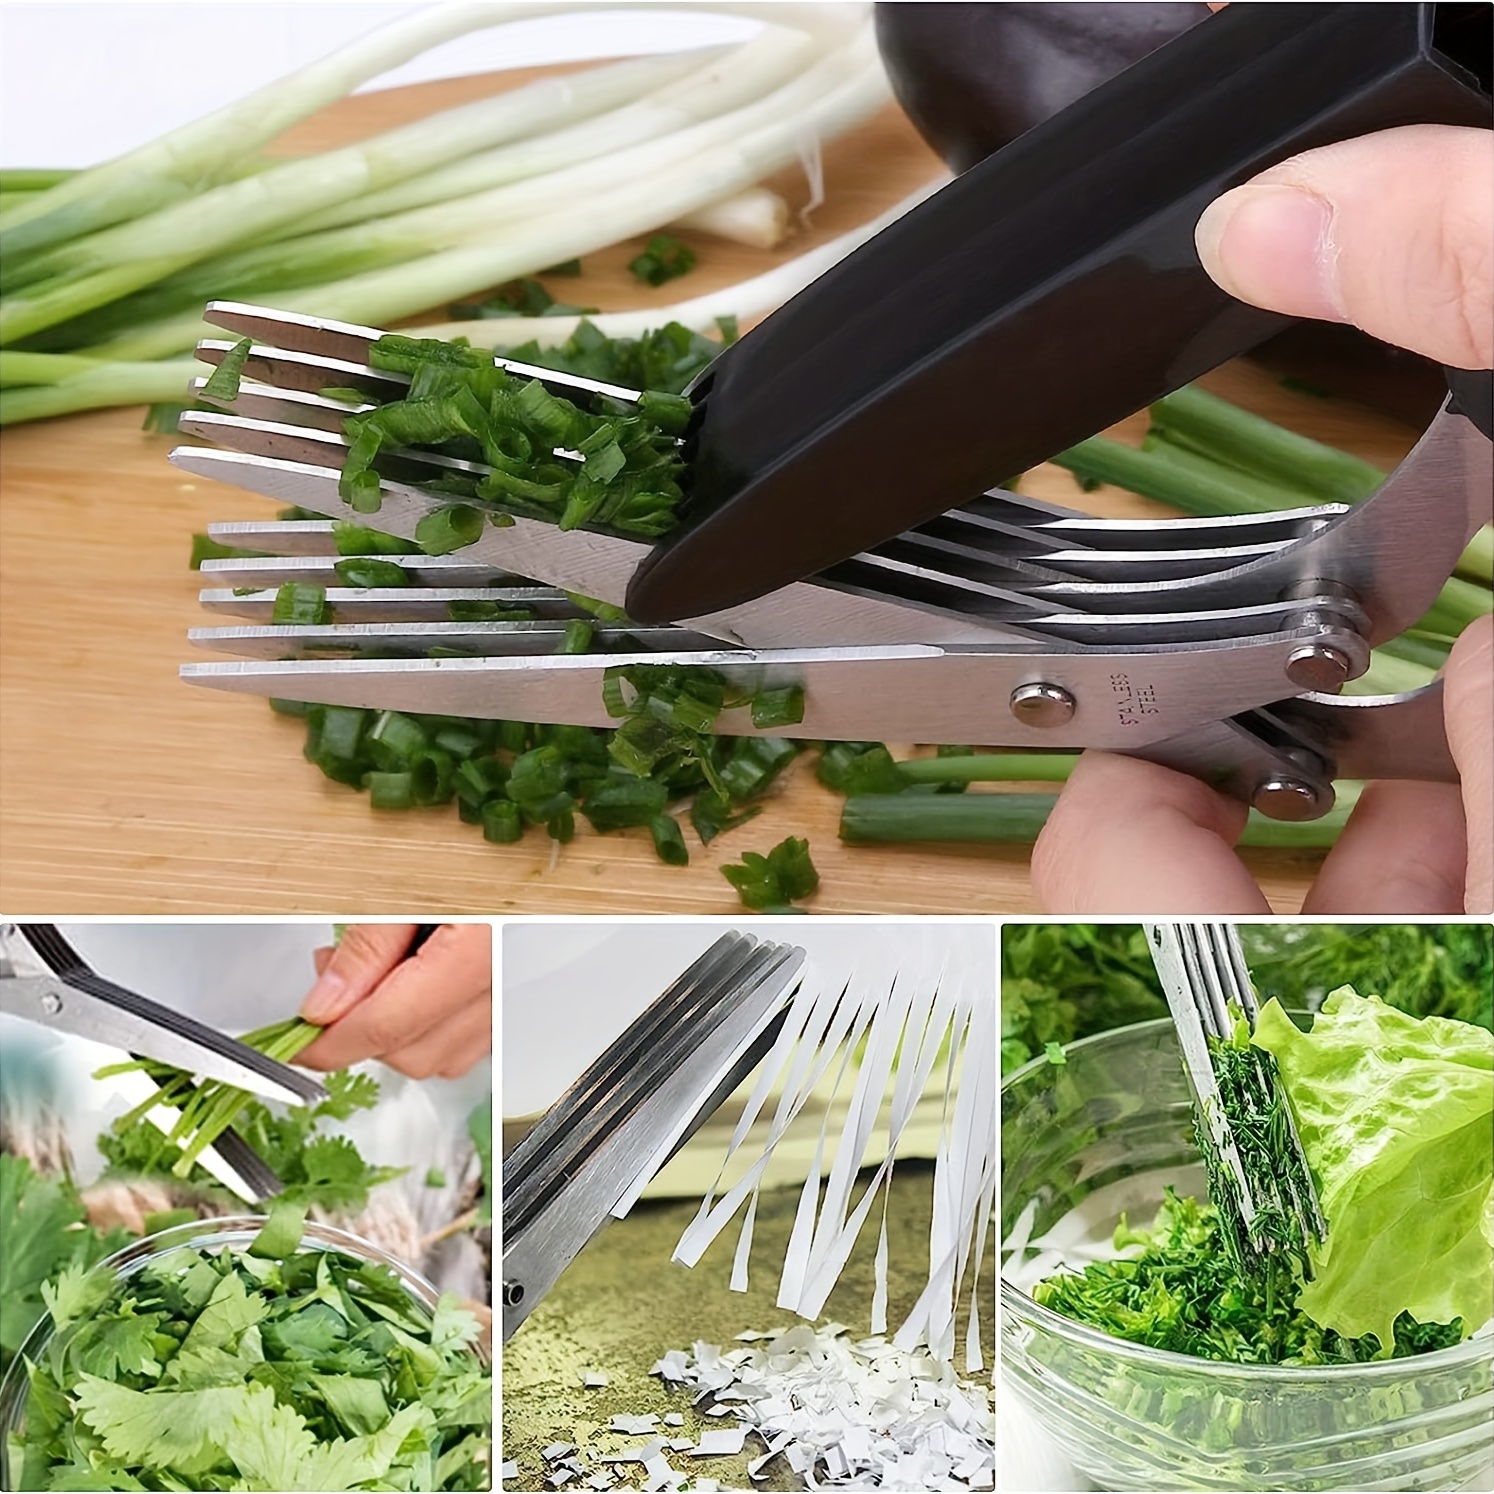 How to Cut Vegetables Using Kitchen Scissors Recipe